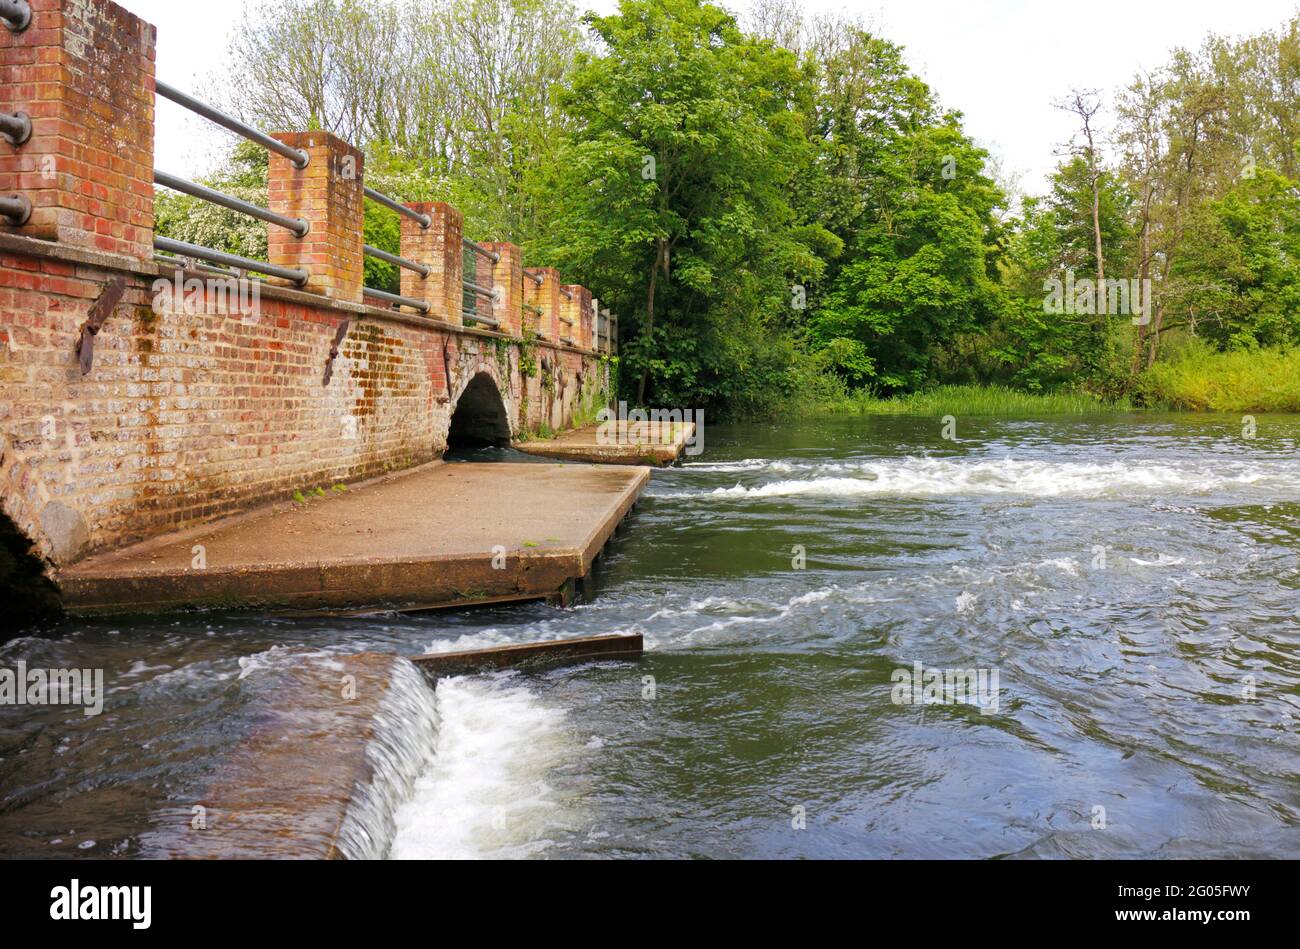 A view of the River Bure and 18th century brick arches remaining from the burnt down watermill at Horstead, Norfolk, England, United Kingdom. Stock Photo